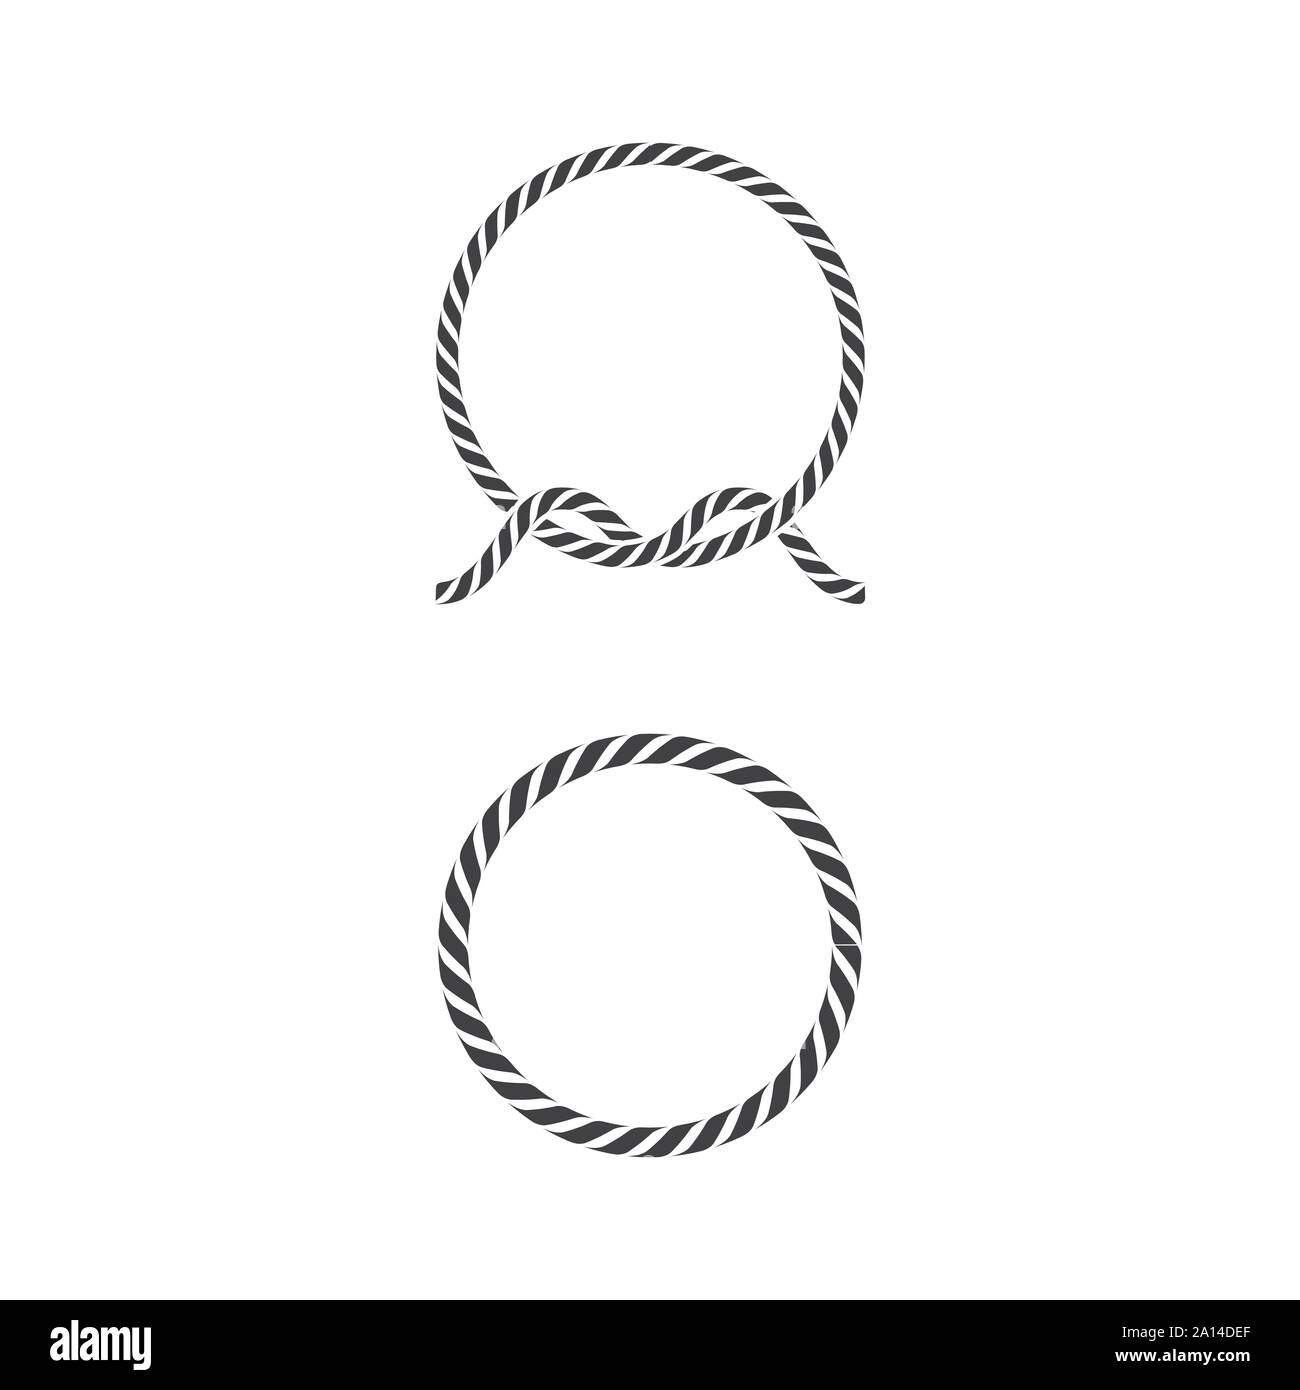 rope vector illustration design template Stock Vector